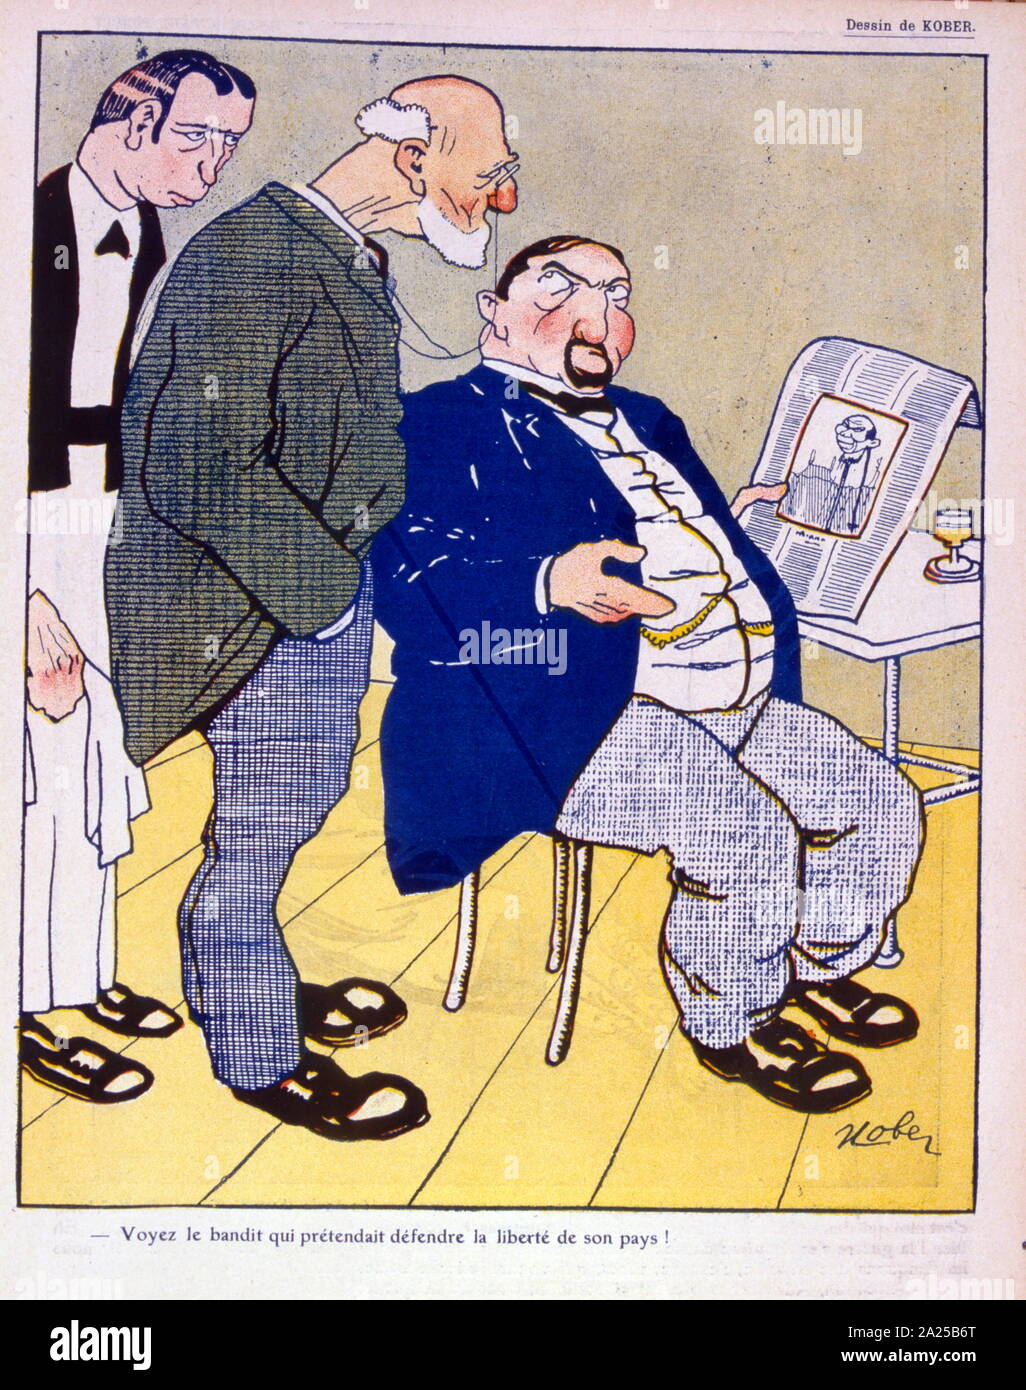 French satirical illustration showing two men looking at a newspaper and discussing political freedoms. It may be a reference to turmoil in China following the accession of the last emperor in 1908 Stock Photo